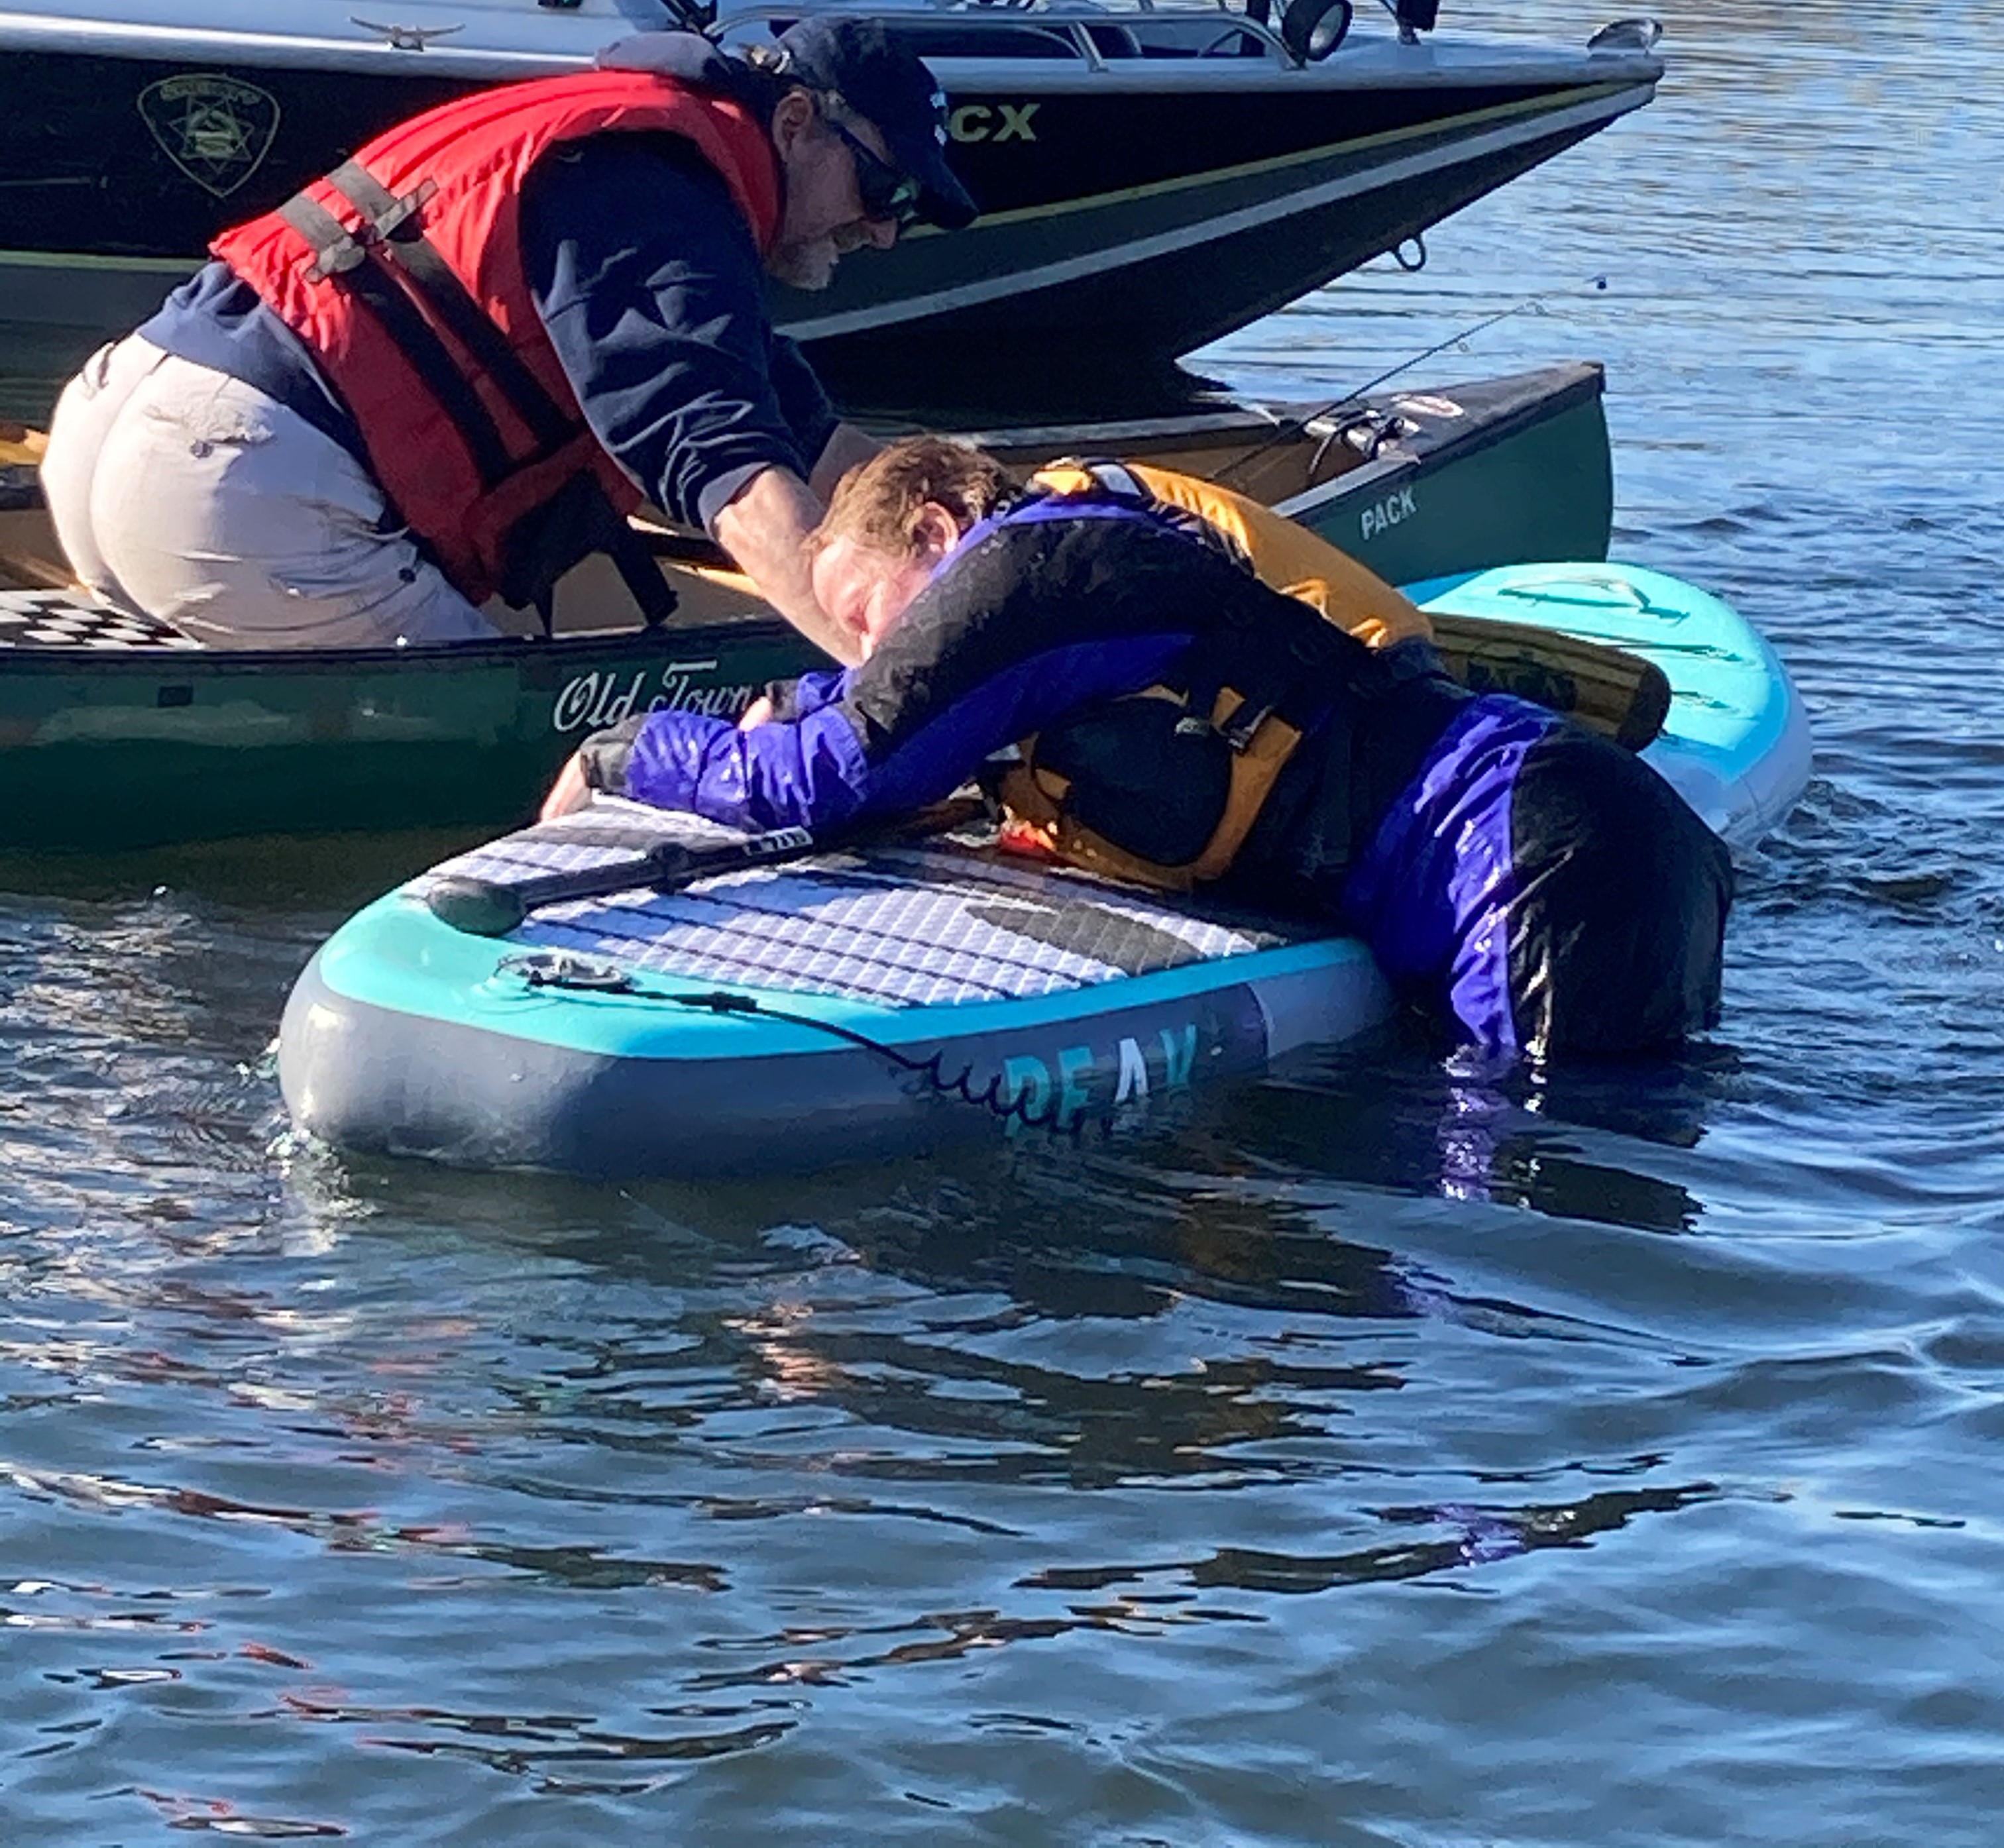 Care -Canoeist helping a paddleboarder get back on the board